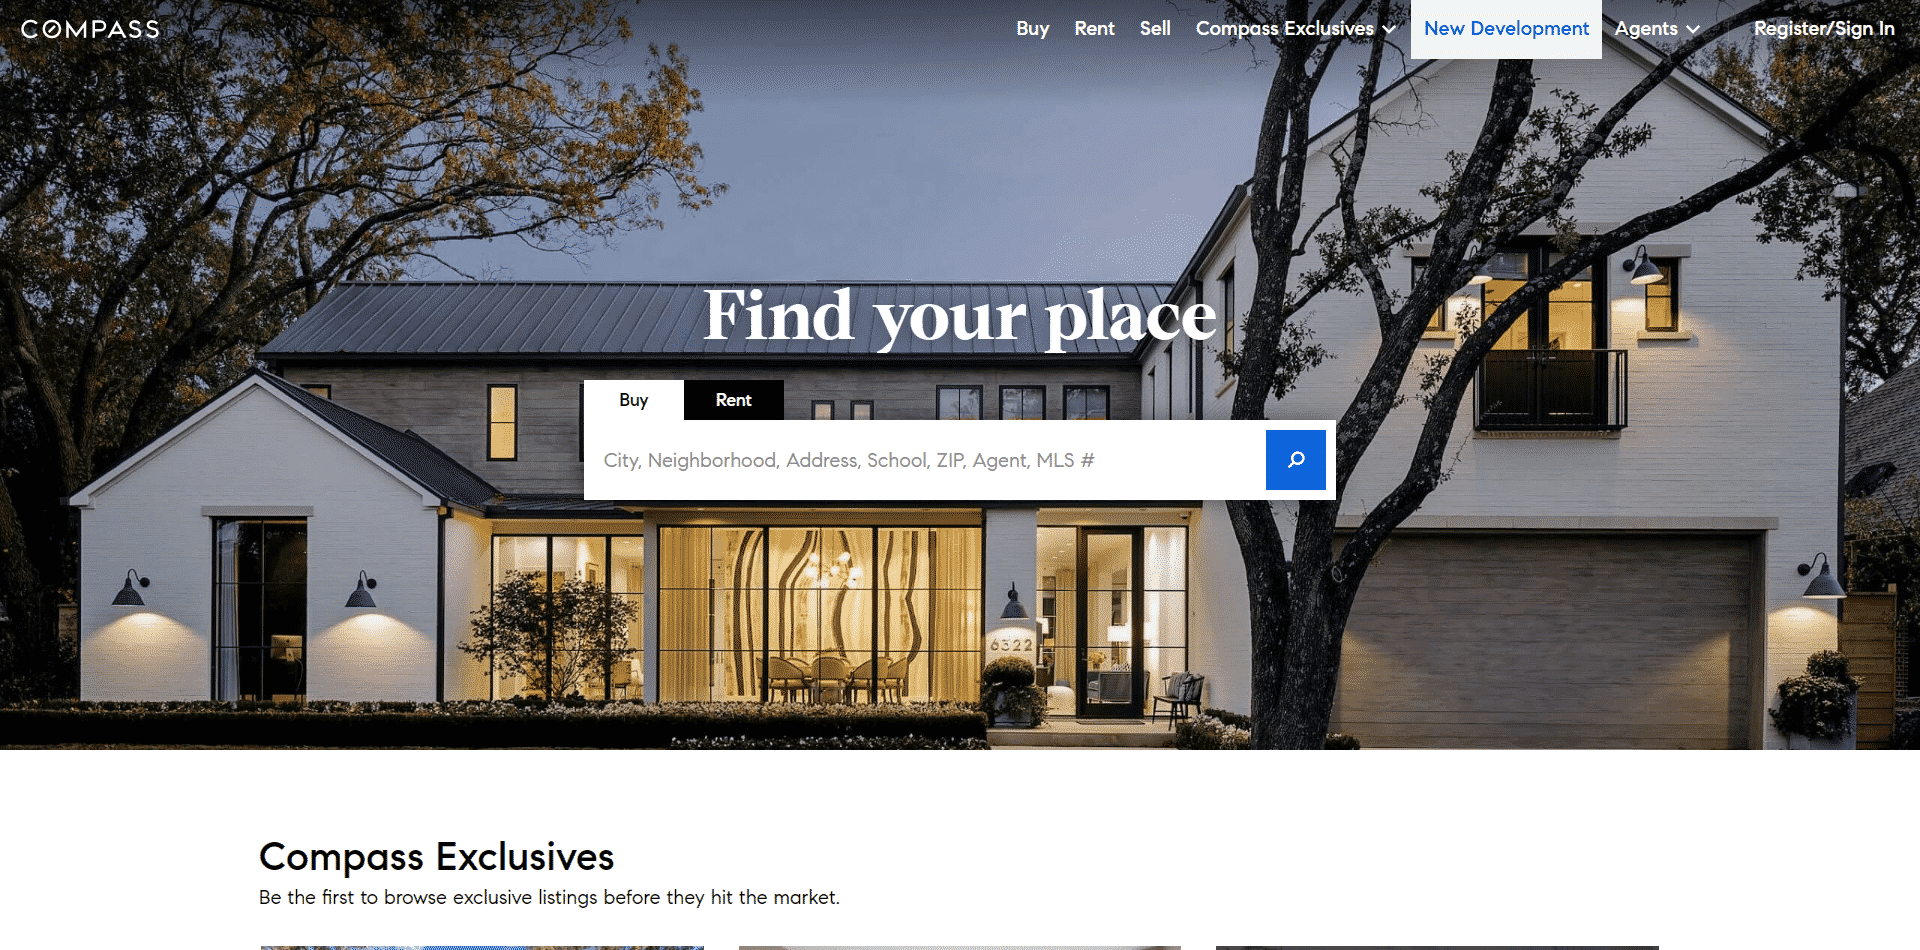 Download Your Real Estate Bootstrap Template - Designmodo